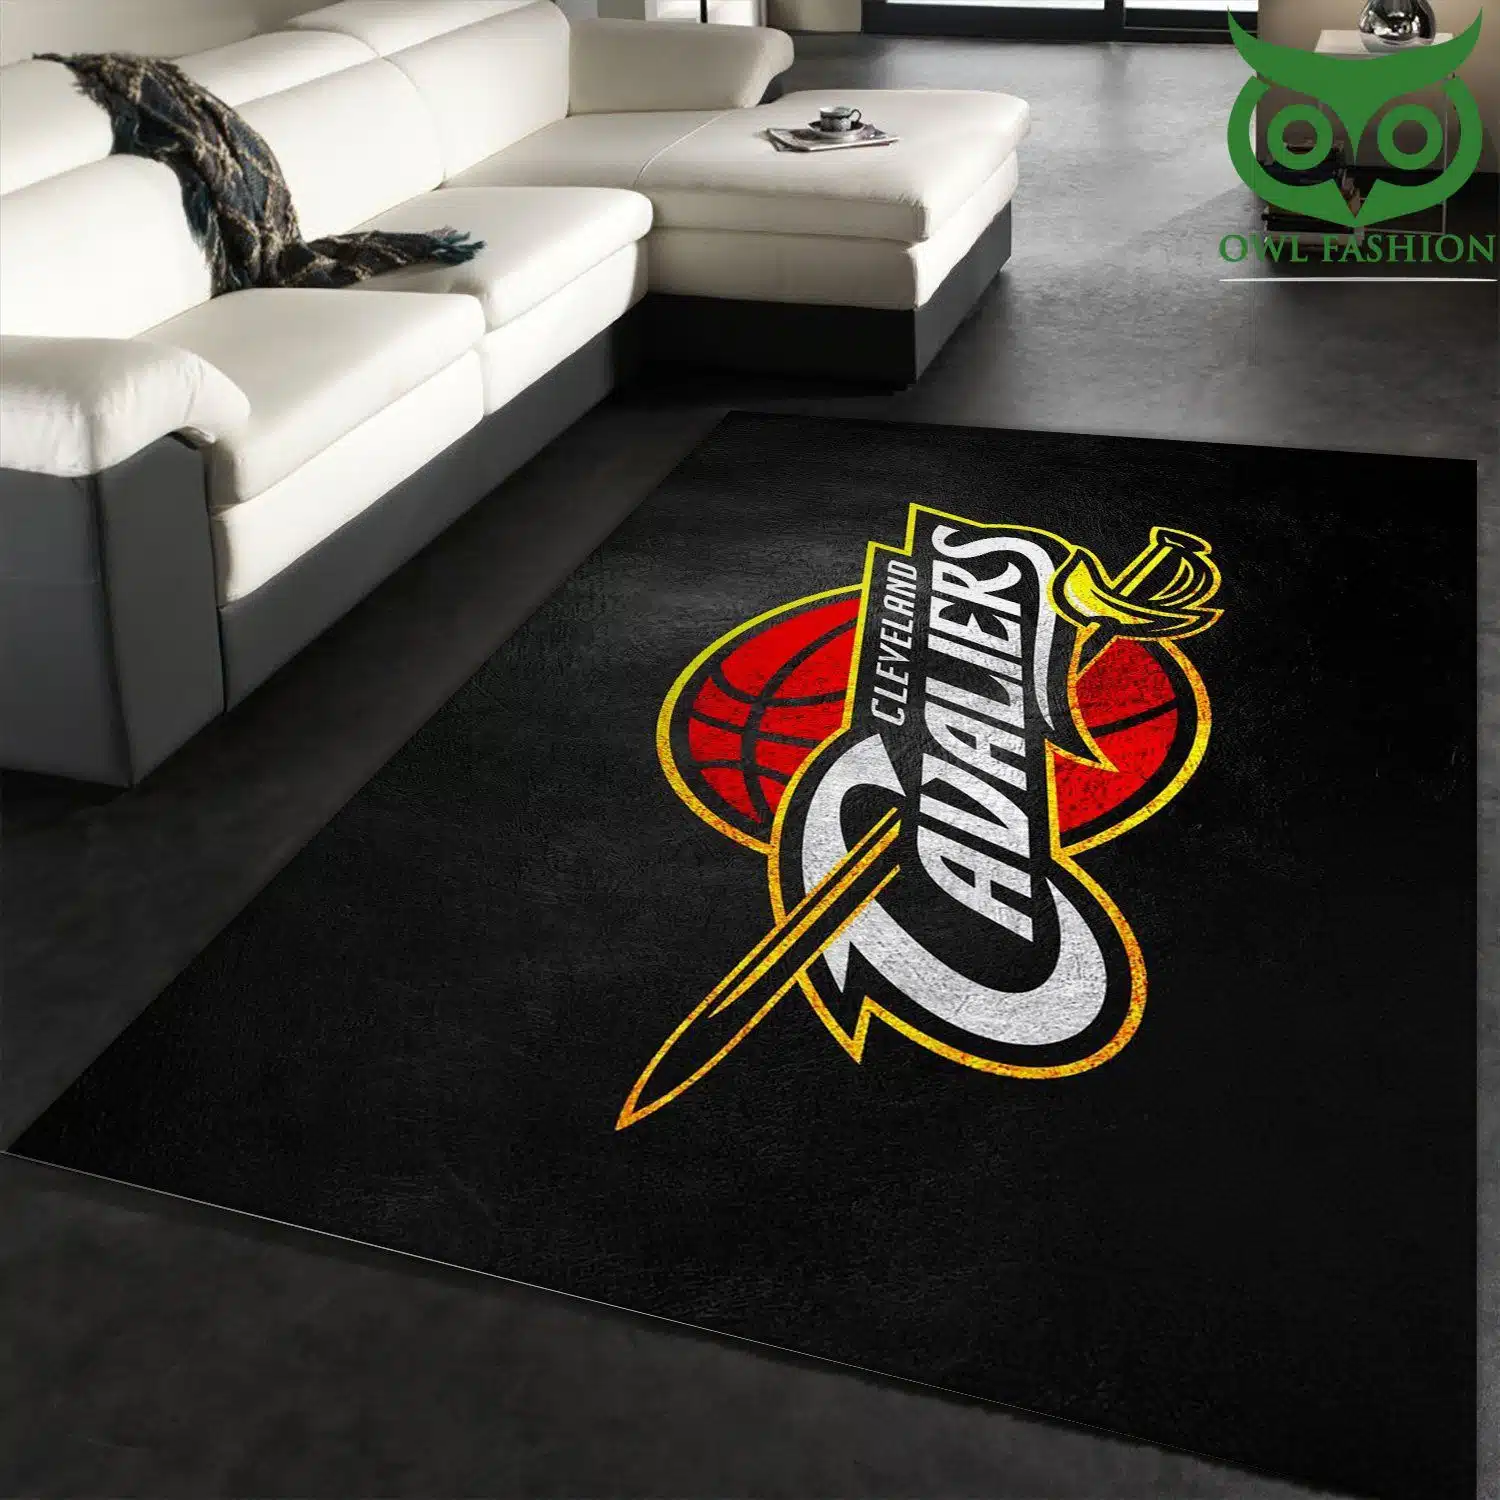 Cleveland Cavaliers Carpet New Rug Rectangle (Version 2) - Thickness: 6-7mm 1